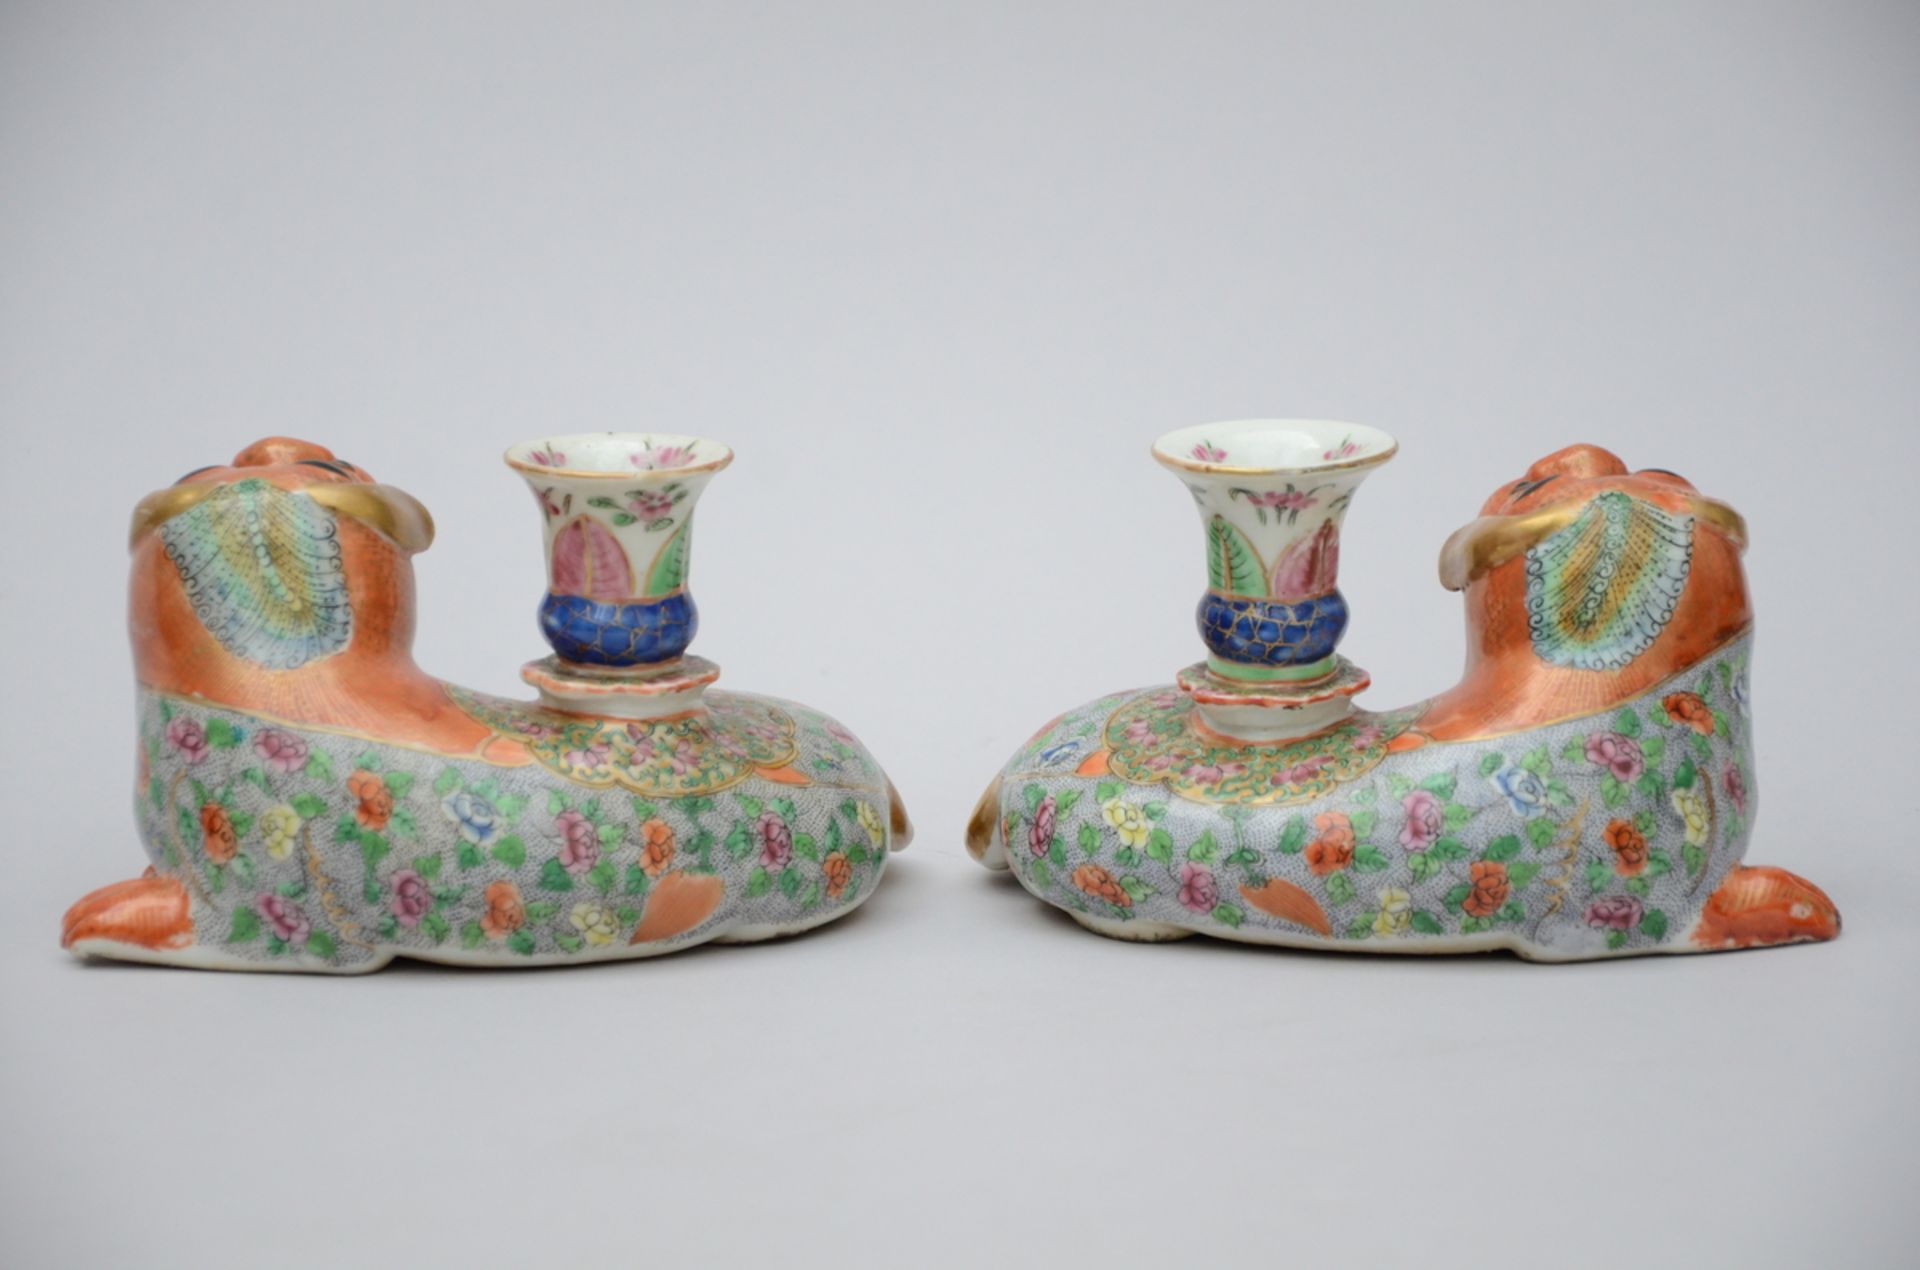 A pair of lions in Chinese canton porcelain, 19th century (L18x h10.5cm) (*) - Image 2 of 4